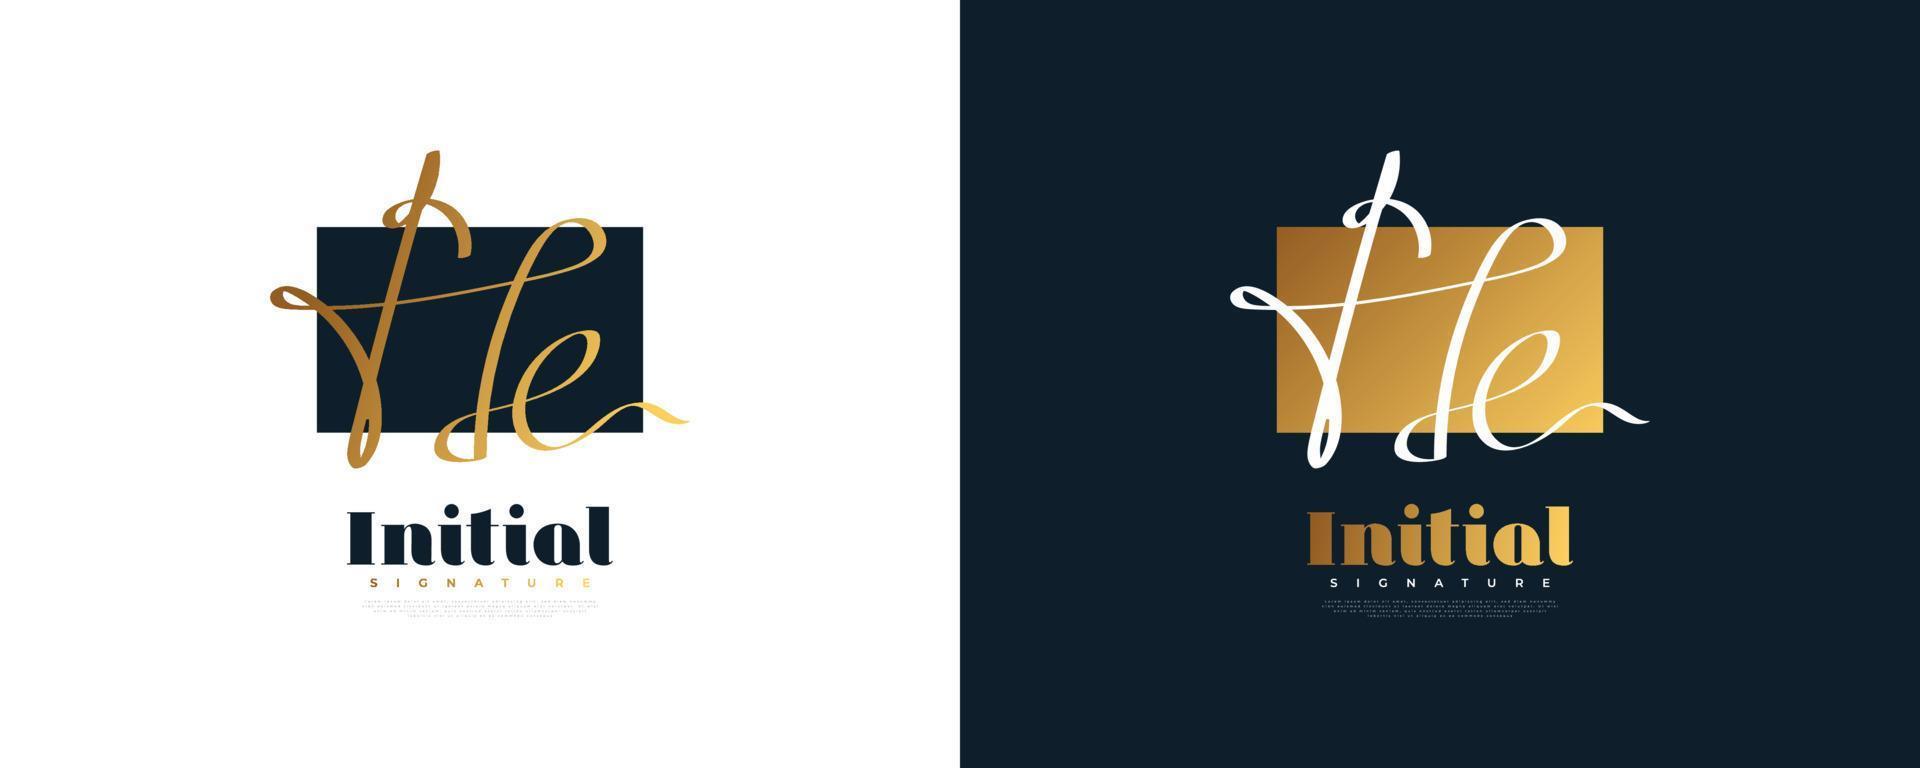 H E Initial Signature Logo Design in Gold Handwriting Style. H and E Initial Logo or Symbol vector